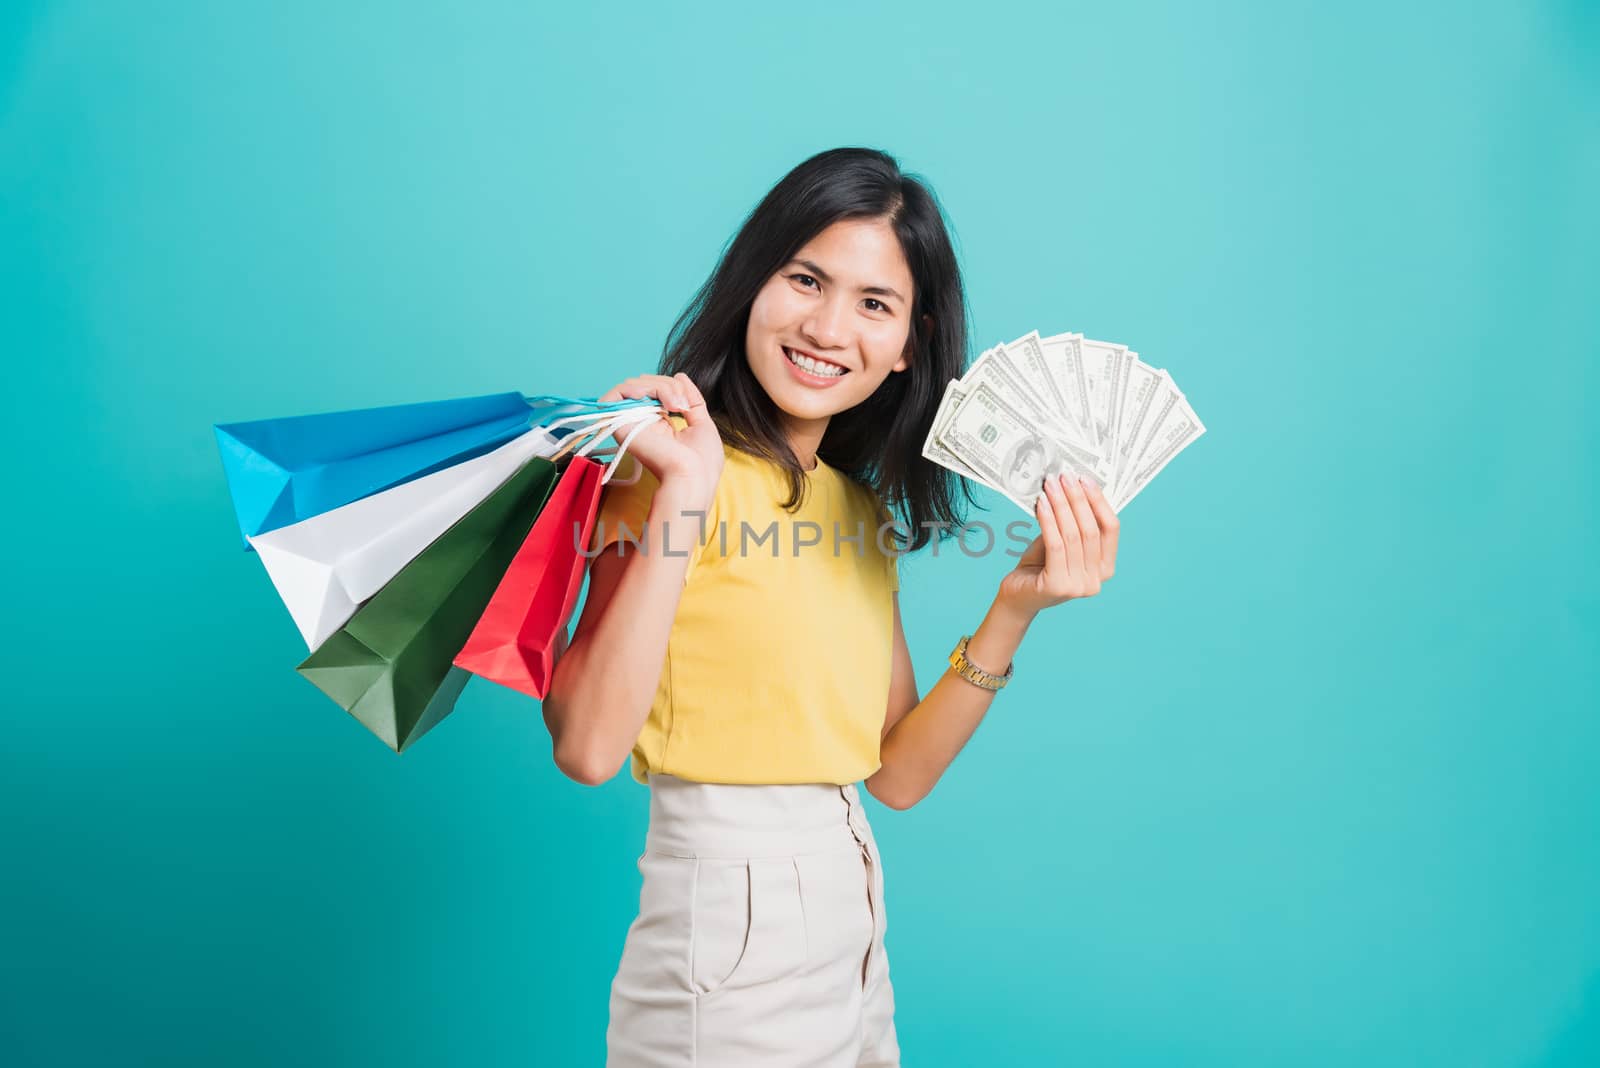 woman smile standing wear, She holding shopping bags and dollars by Sorapop